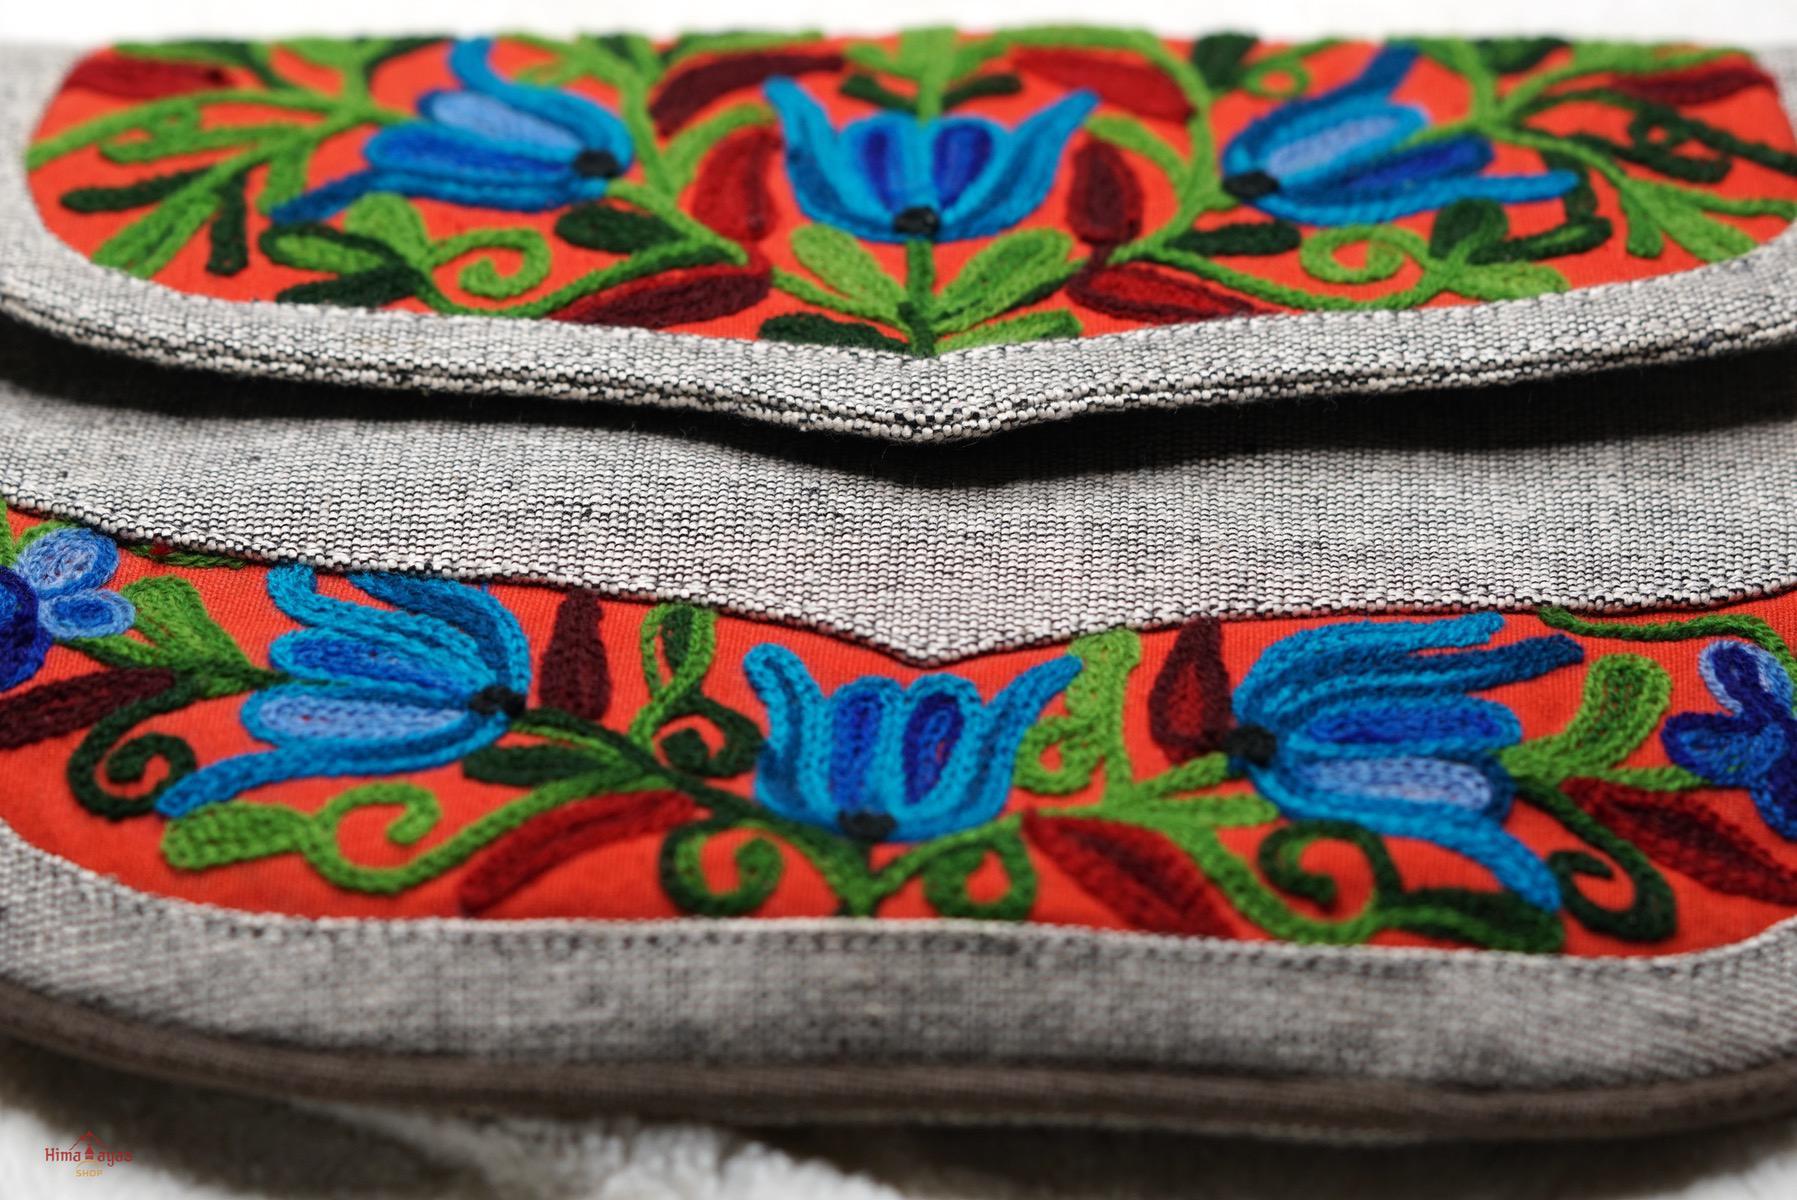 The sustainable environment friendly bags for every day uses, crafted with exquisite floral hand embroidery.